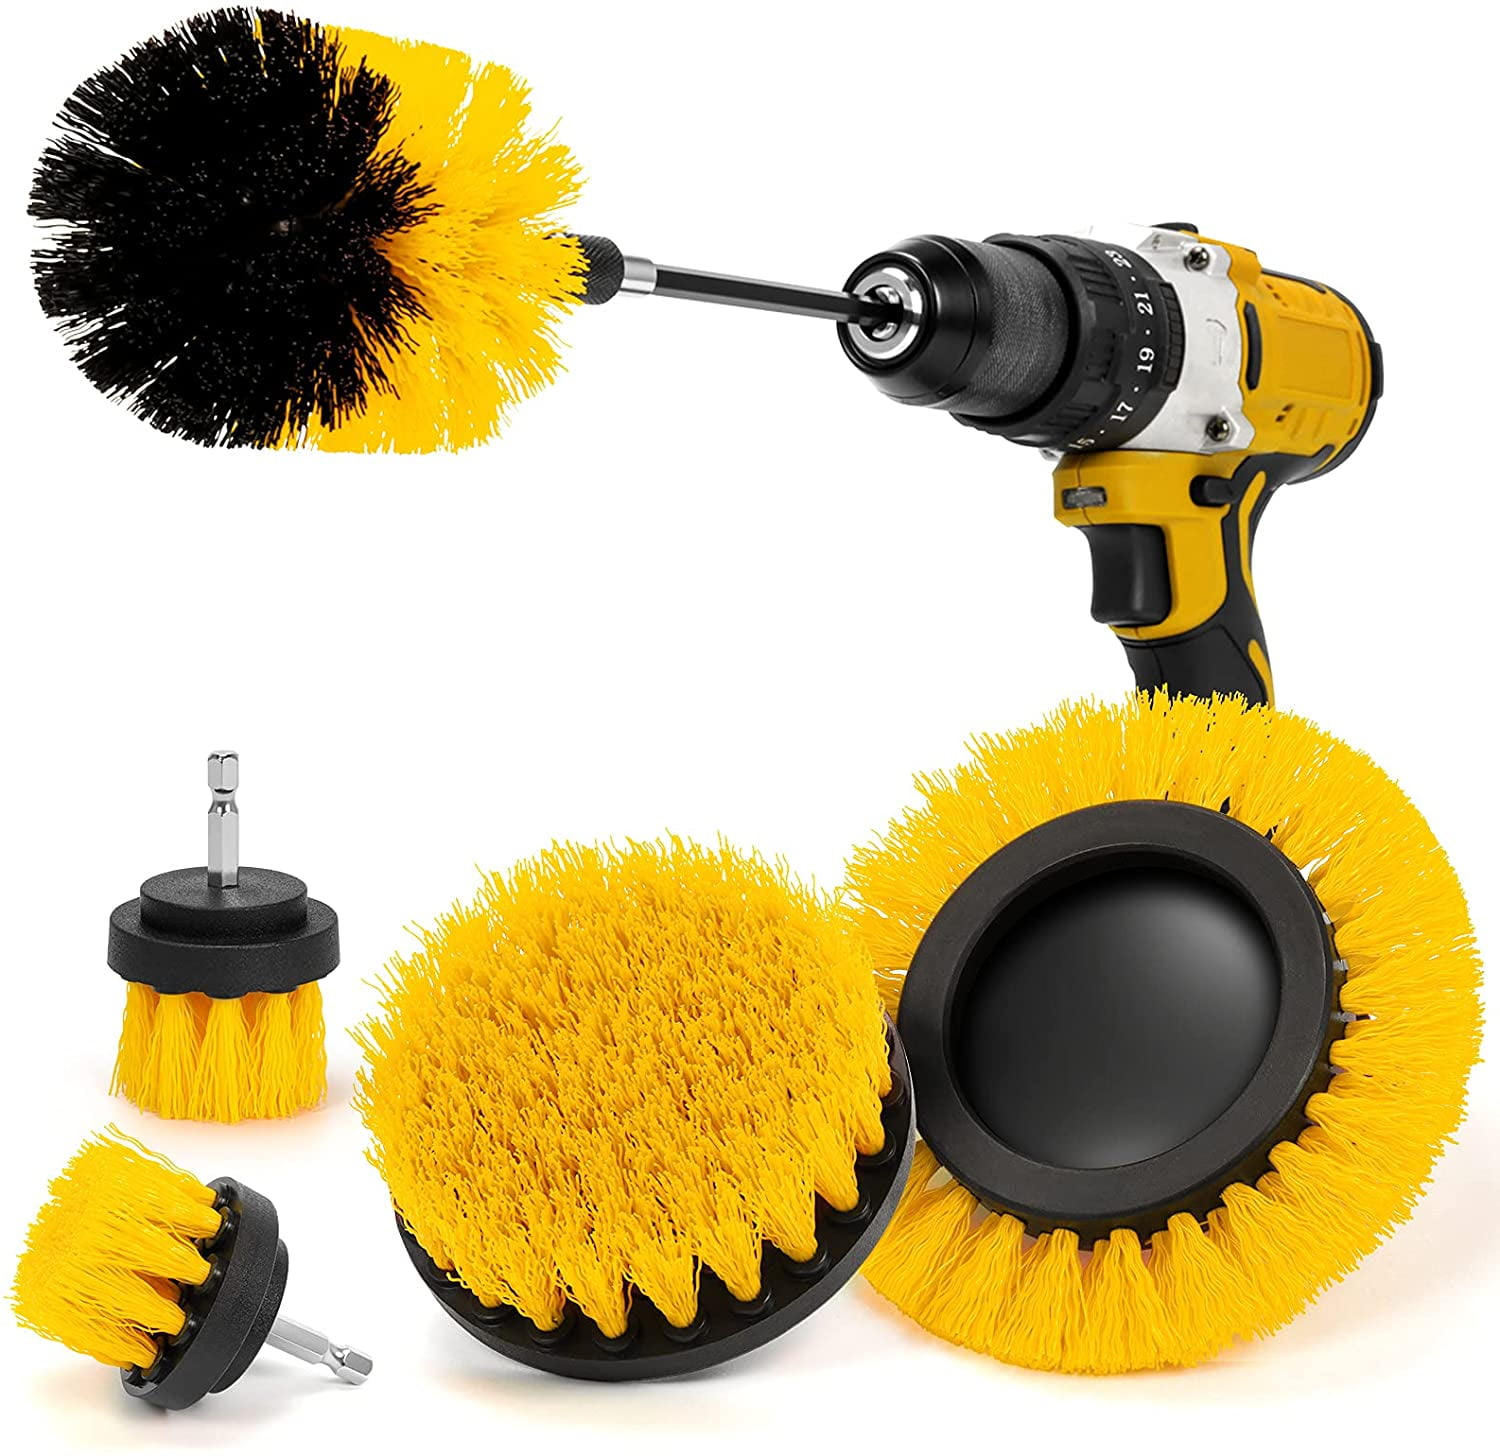 Bathroom Accessories – Drill Brush - Scrub Brush Kit with Extension – Bath Mat Scrubber – Carpet Cleaner - Clean Bathroom Sink, Shower Mat, Tile and